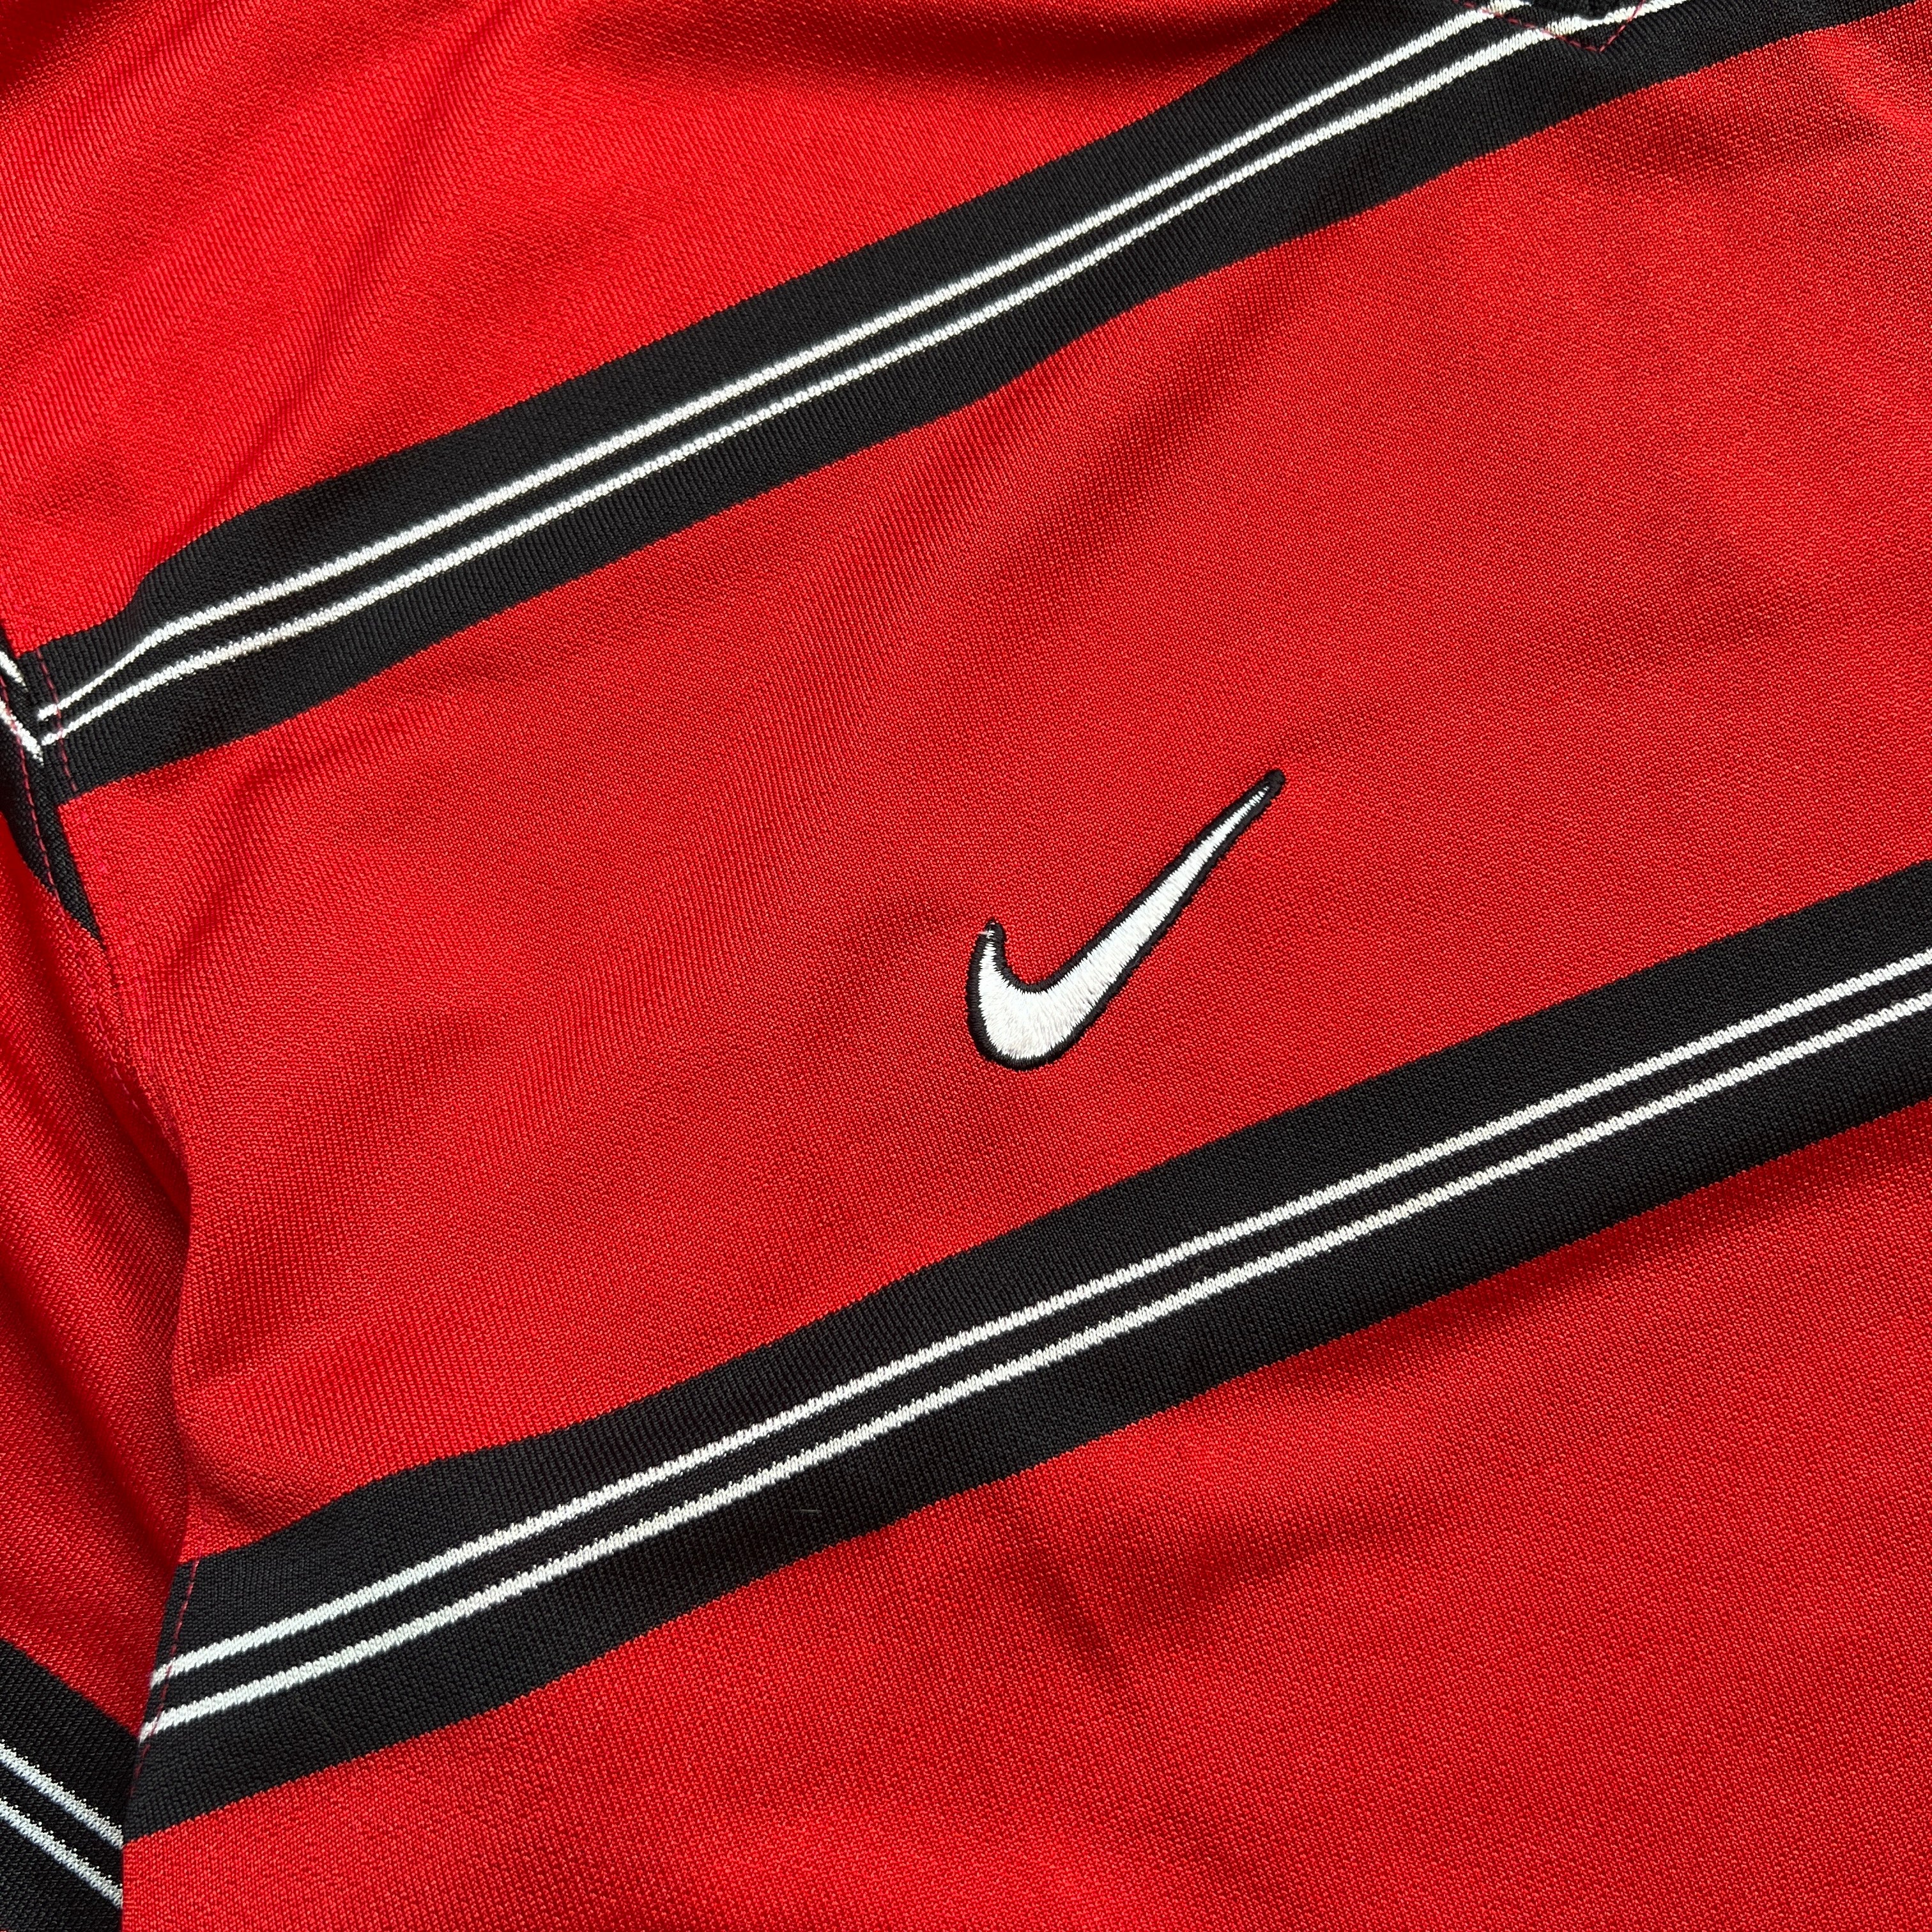 Rugby Stripes Nike Jersey